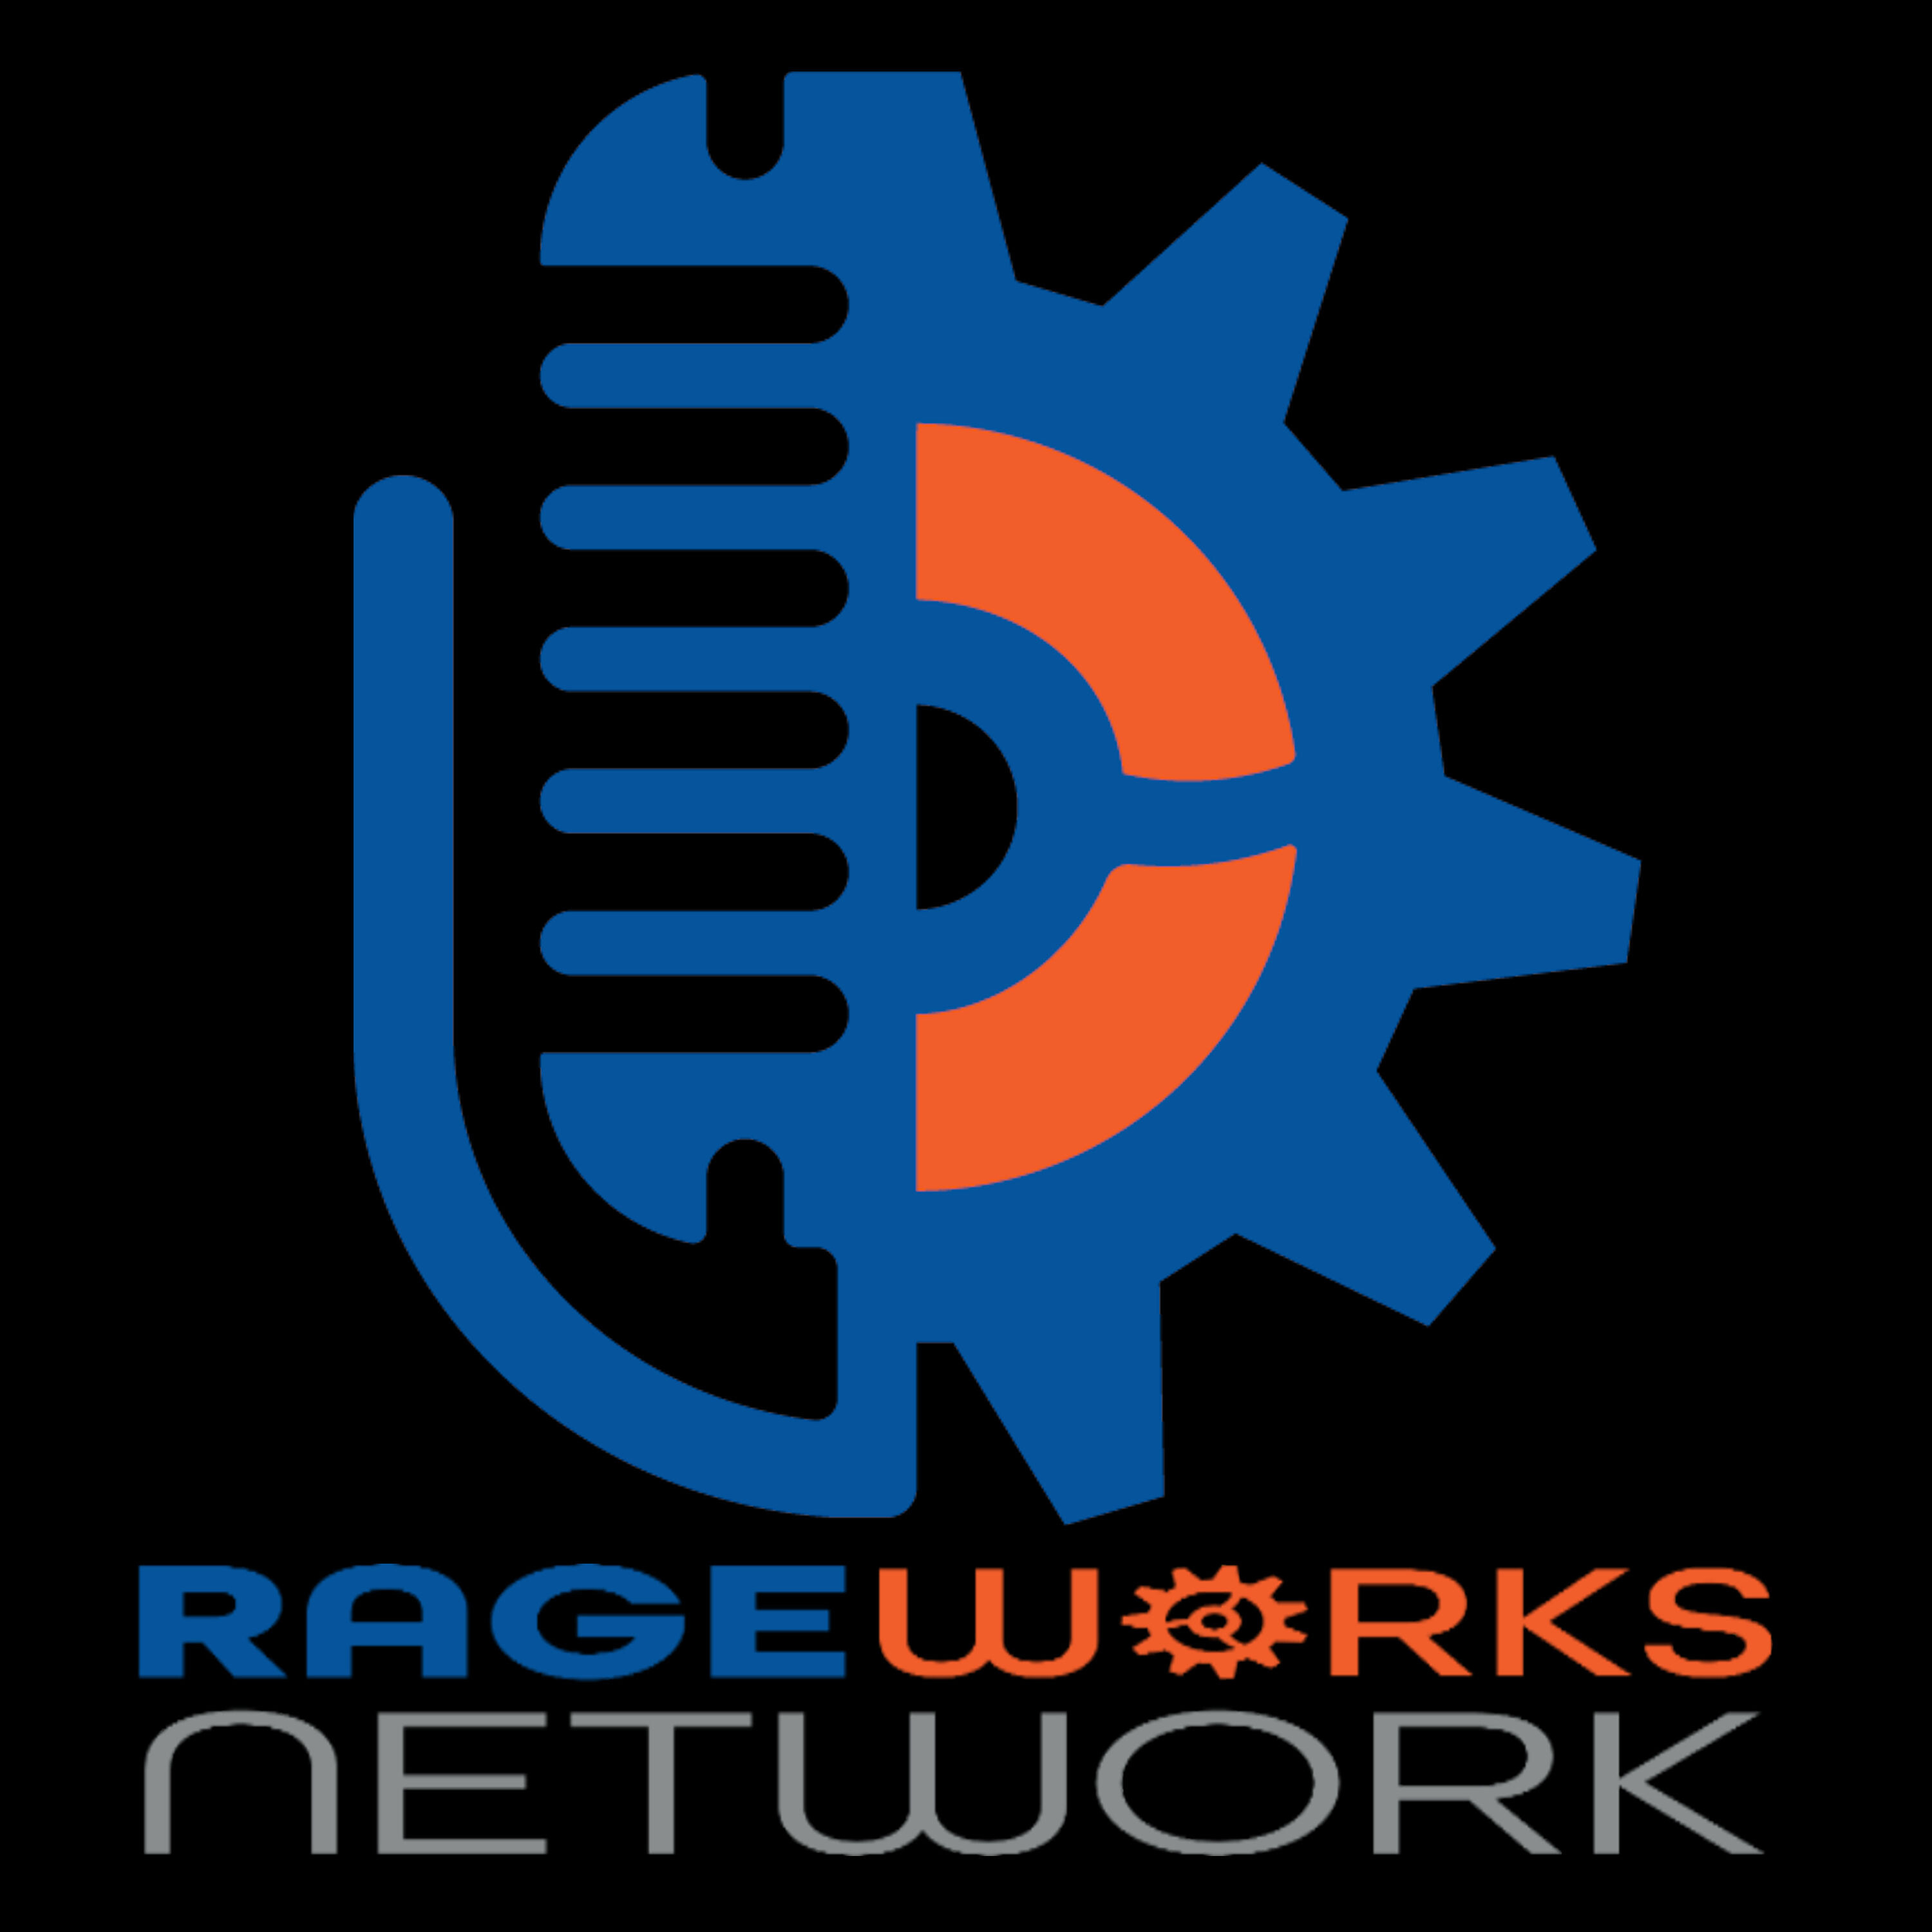 RAGE Works Network-All Shows